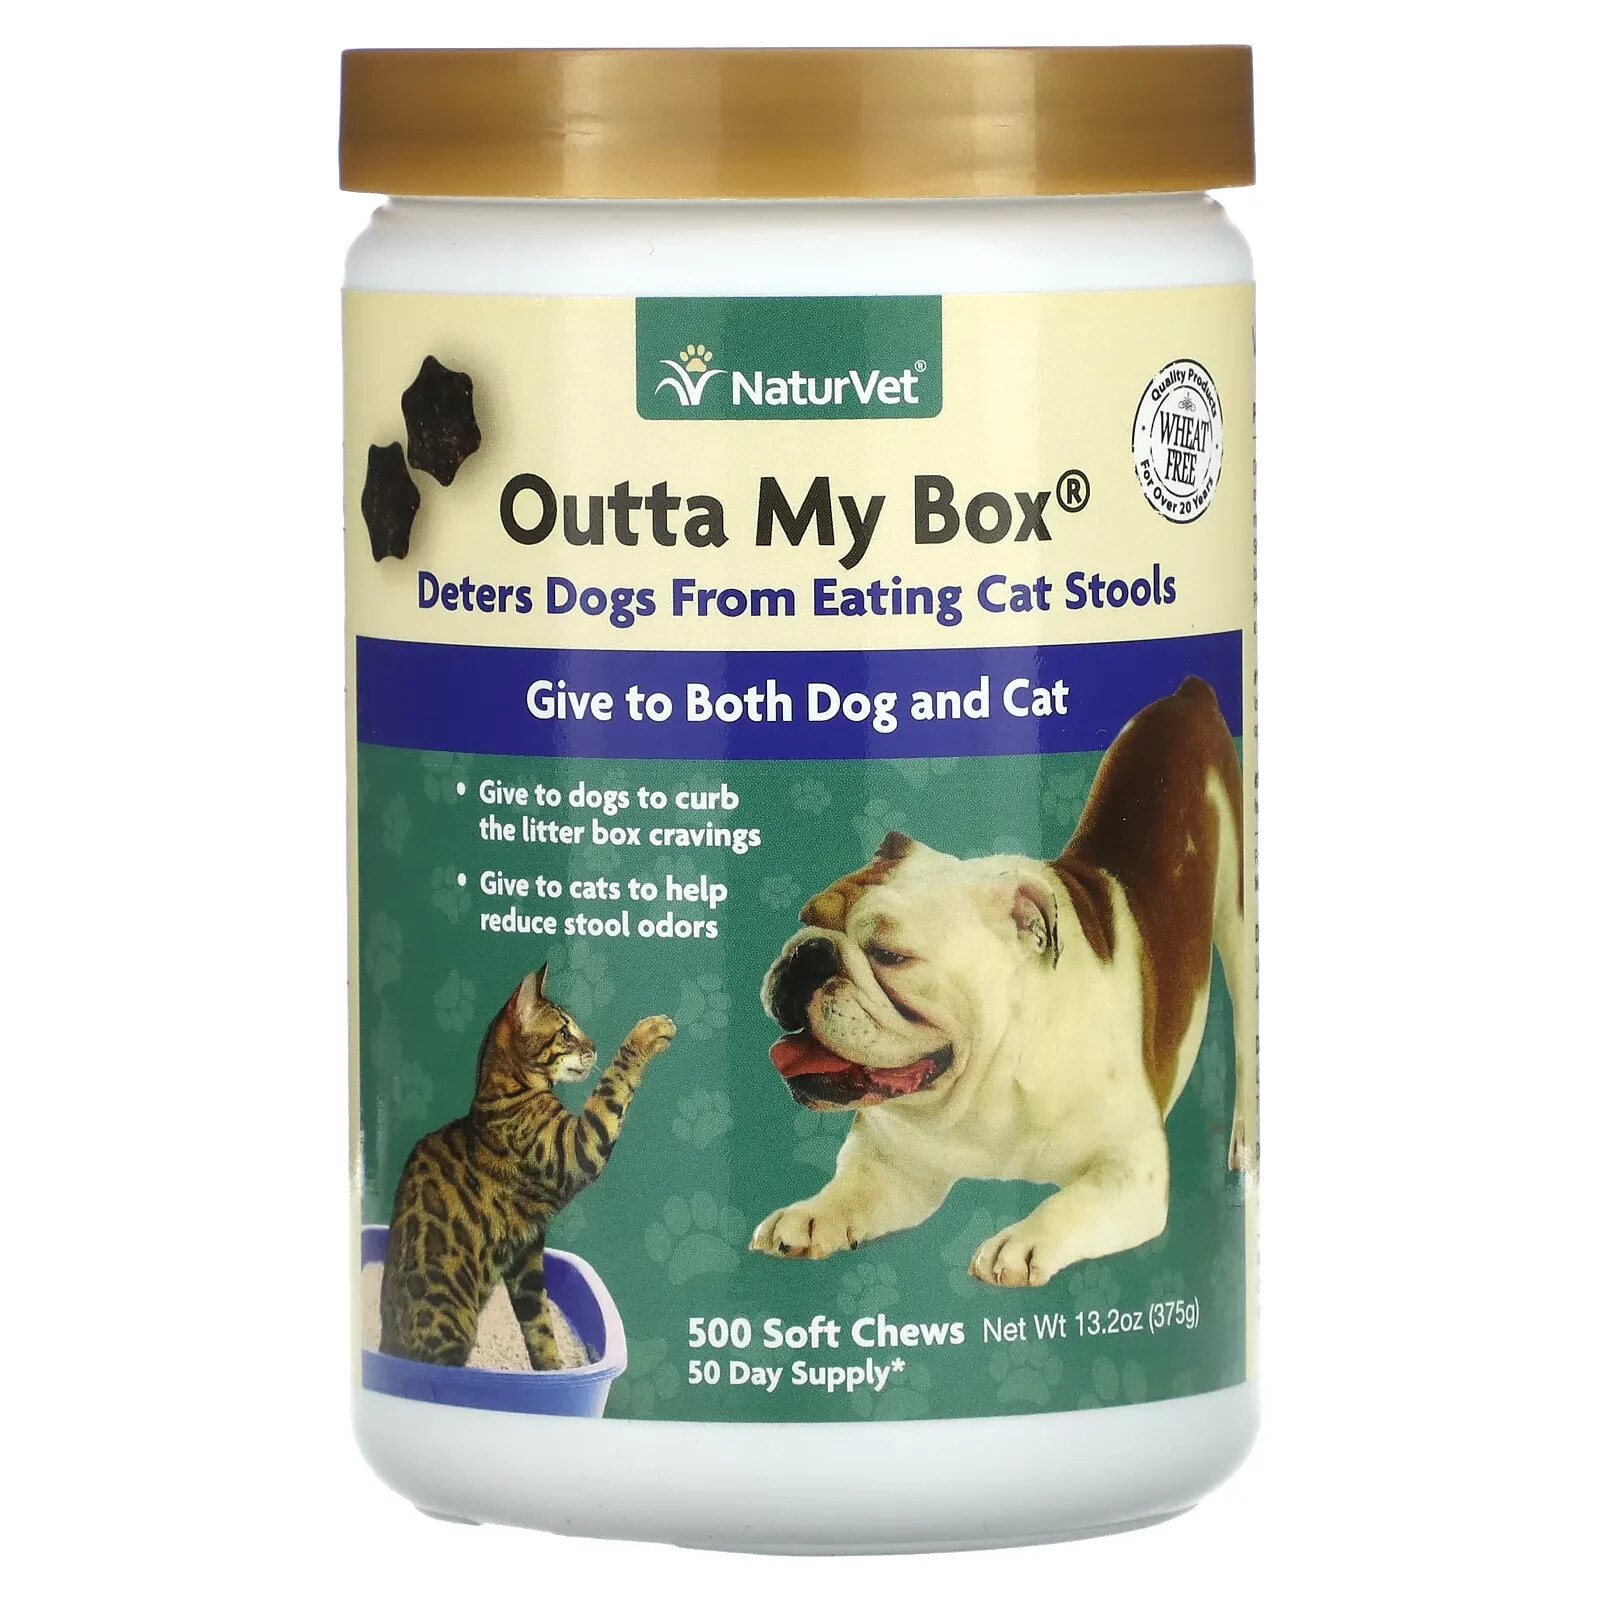 Outta My Box, For Dogs & Cats, 500 Soft Chews, 13.2 oz (375 g)